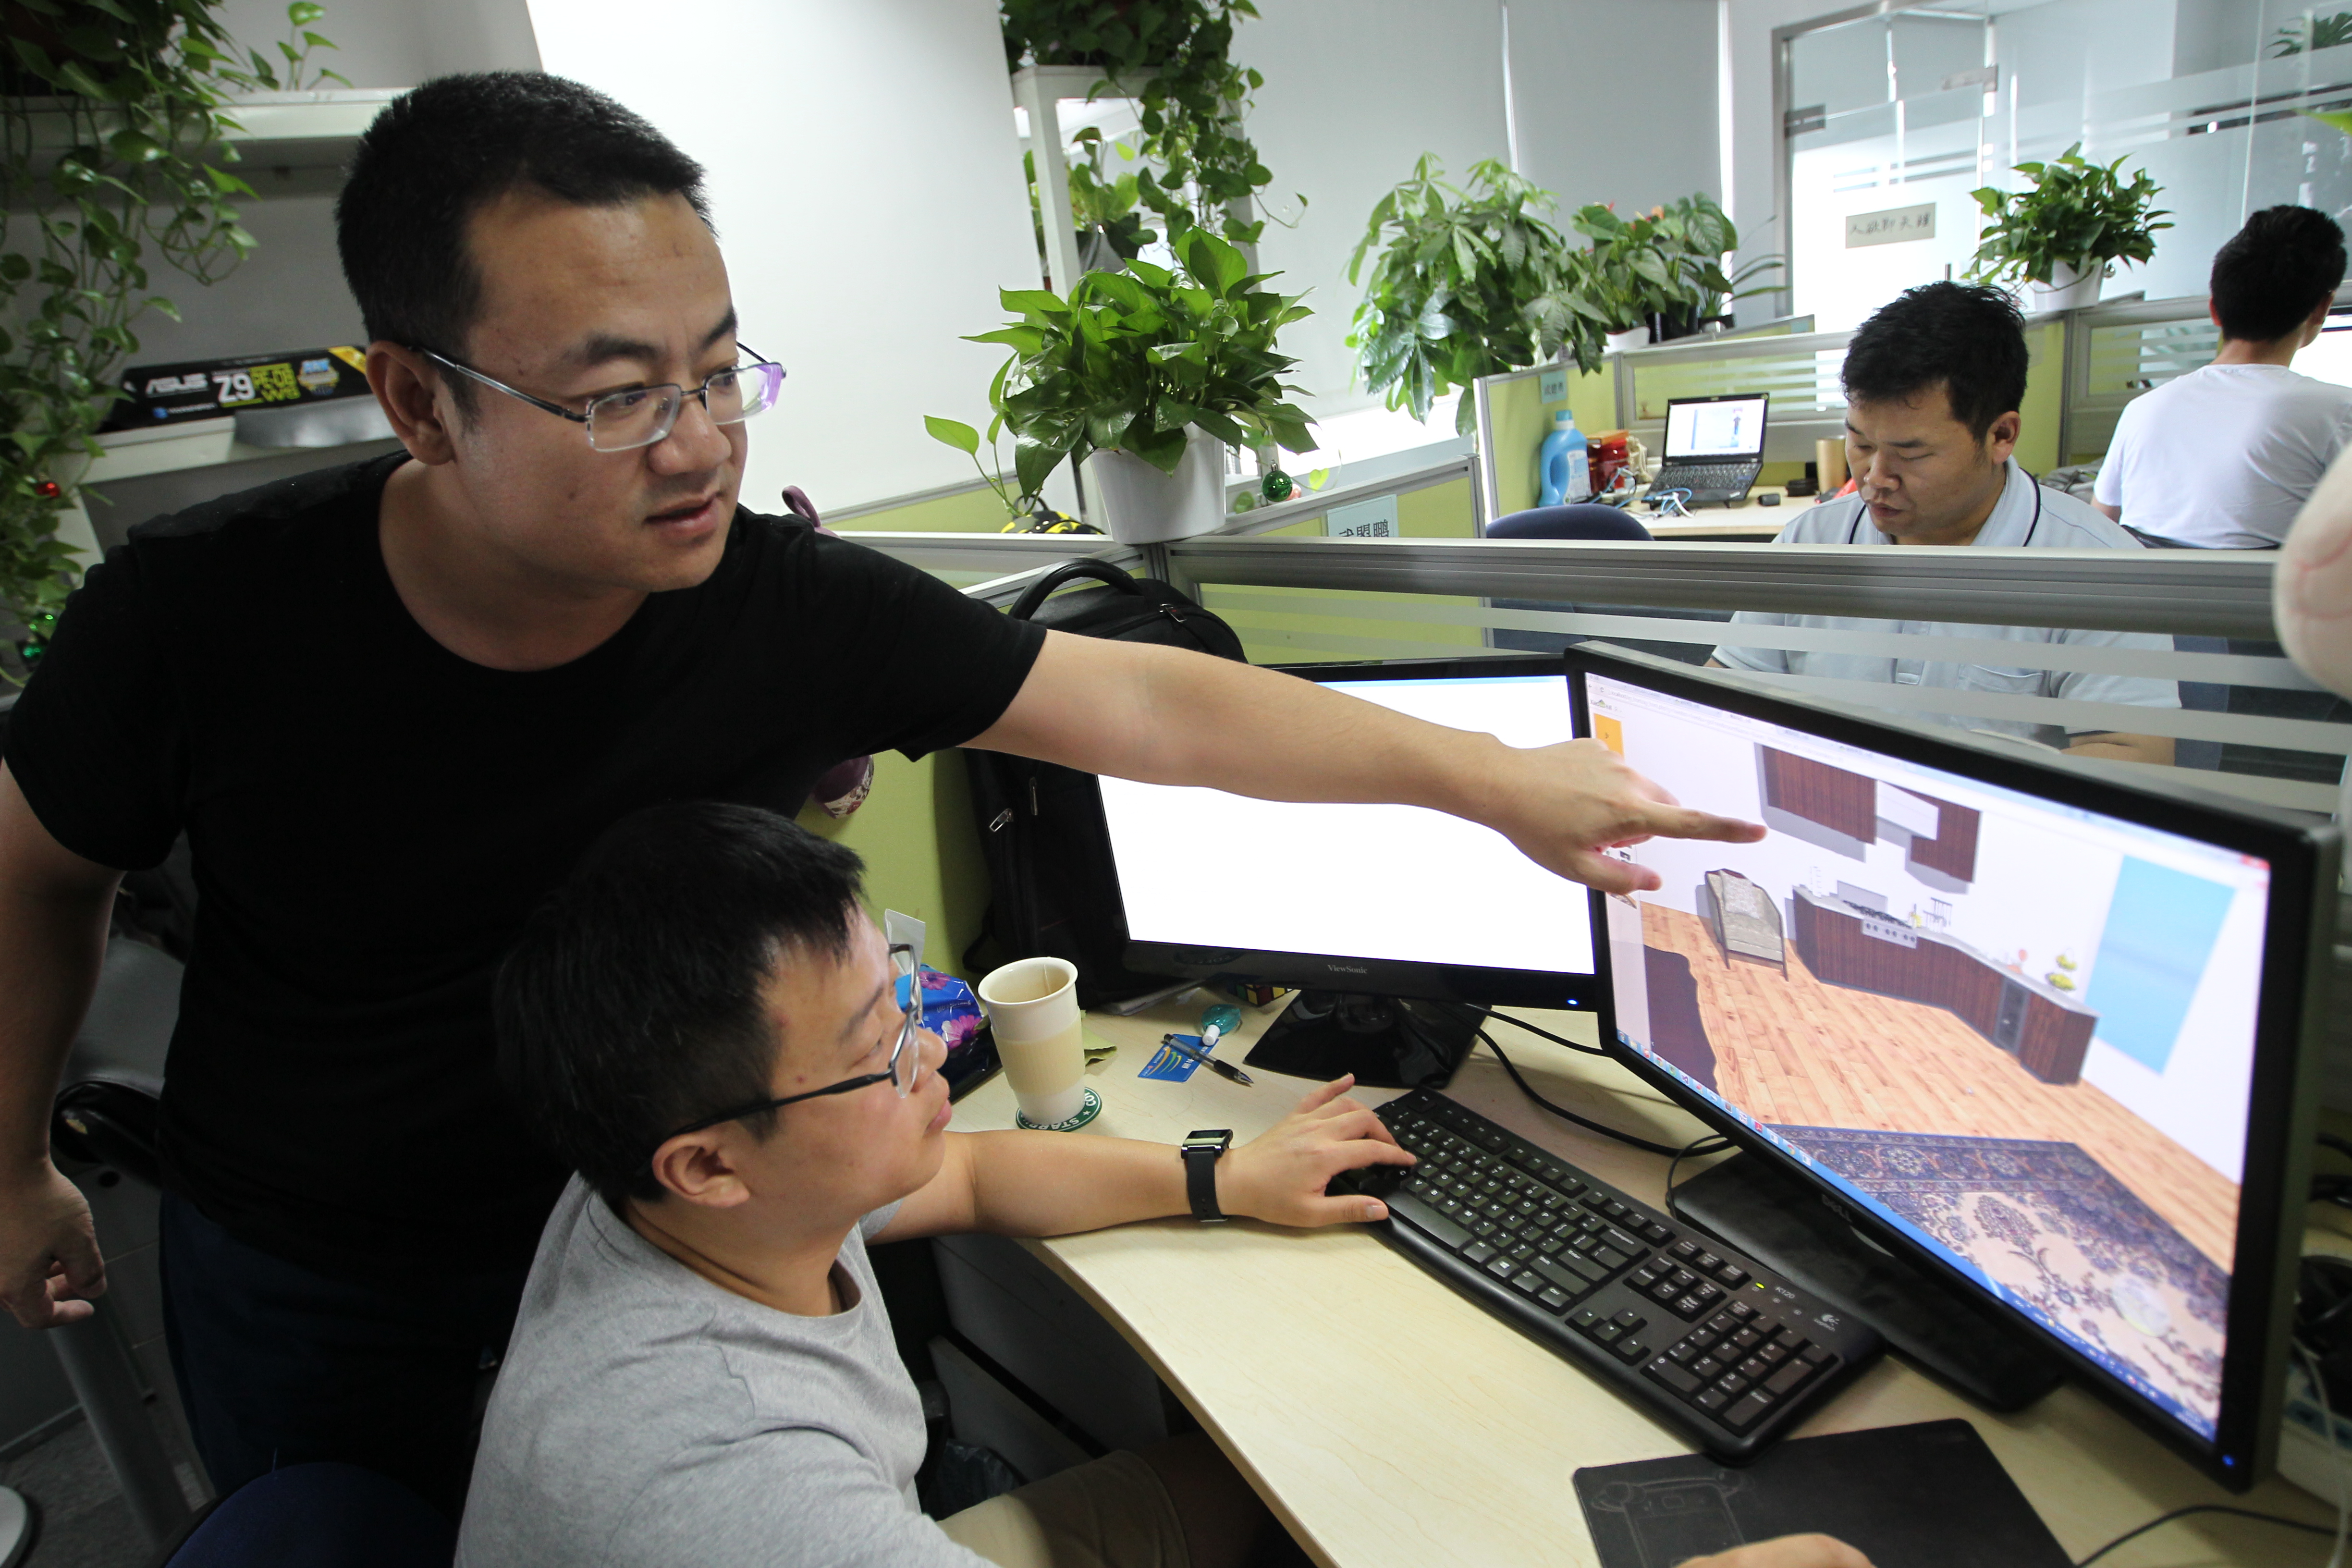 Biyao.com founder Bi Sheng also sees a niche in China's e-commerce market for customised product purchases, which have already taken off in the US. Here he demonstrates his website's 3D software. Photo: Simon Song